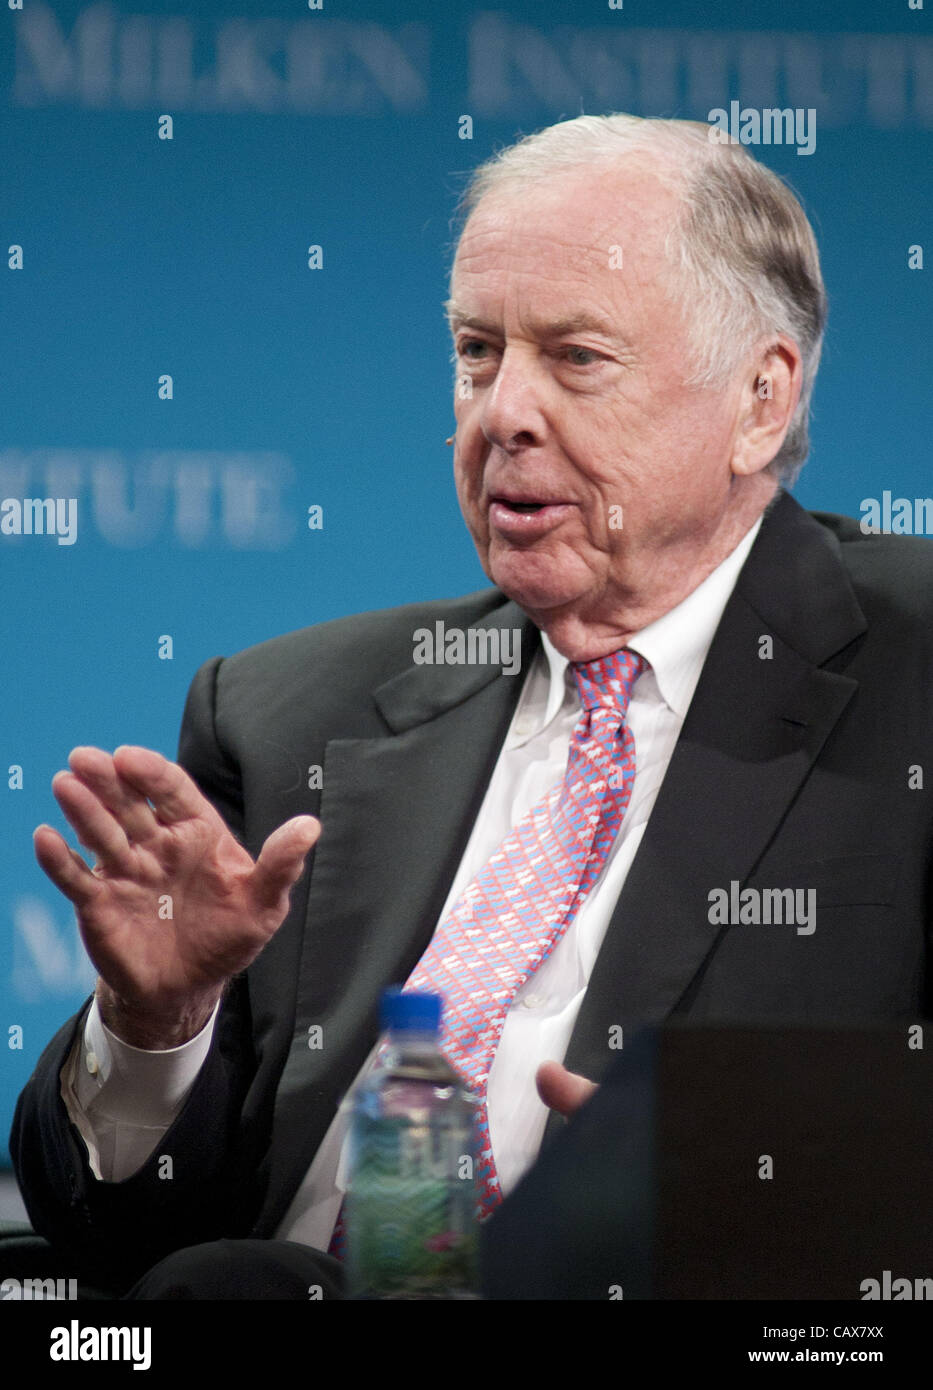 April 30, 2012 - Beverly Hills, California, USA - T. Boone Pickens, Entrepreneur and Philanthropist; Founder, BP Capital at the panel discussion entitled 'Mike Milken Interviews Eike Batista and T. Boone Pickens'  during the Milken Institute Global Conference held Monday, April 30 2012 at the Hilton Stock Photo